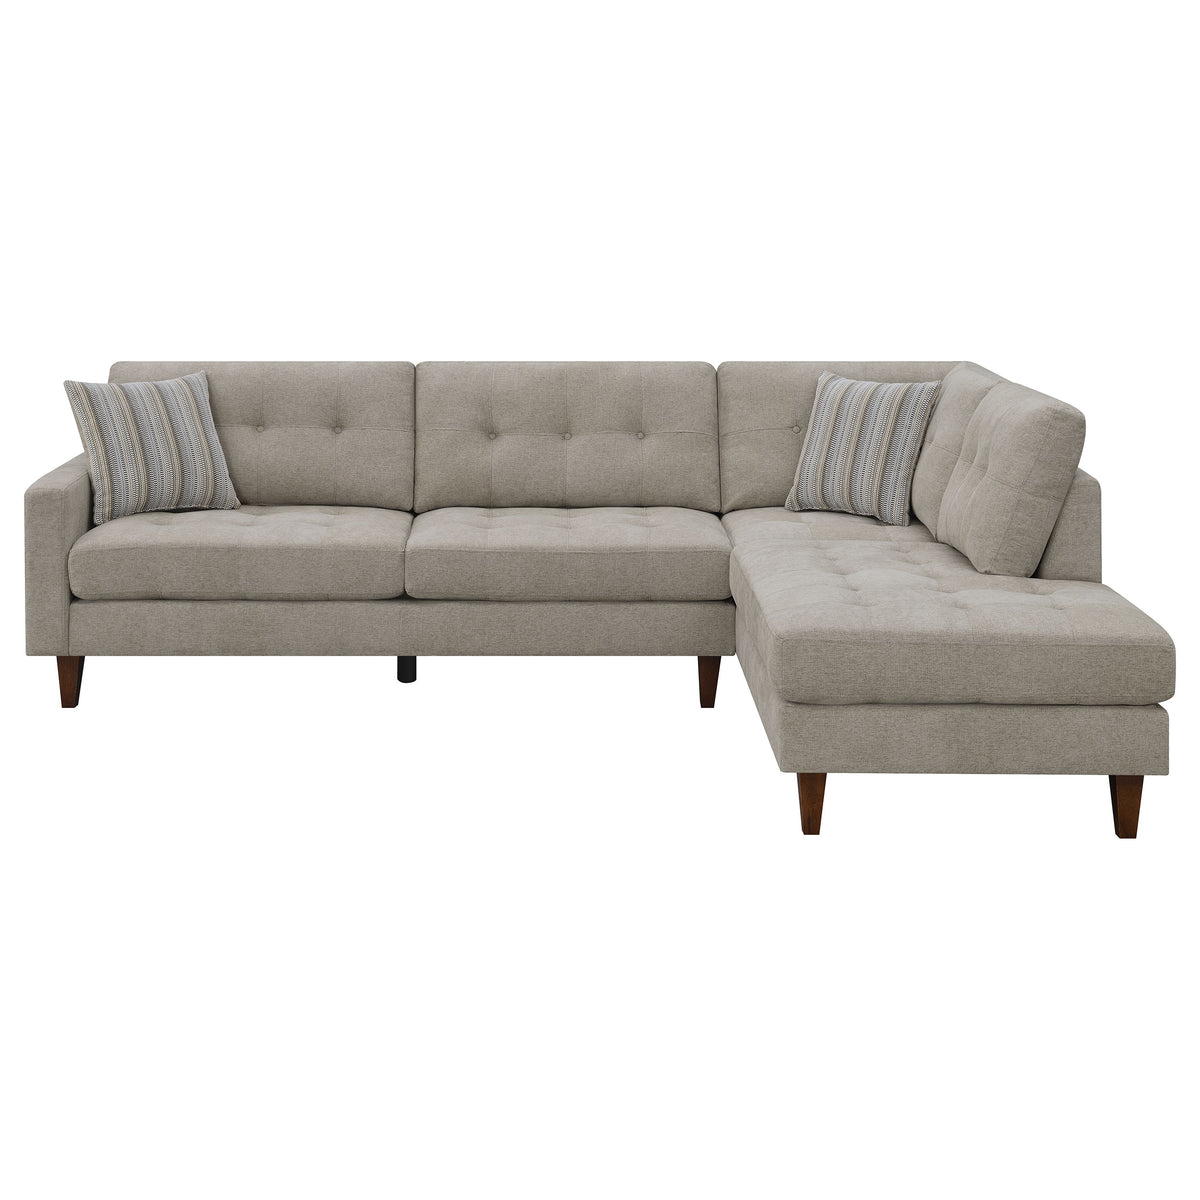 Barton Upholstered Tufted Sectional Toast and Brown Barton Upholstered Tufted Sectional Toast and Brown Half Price Furniture